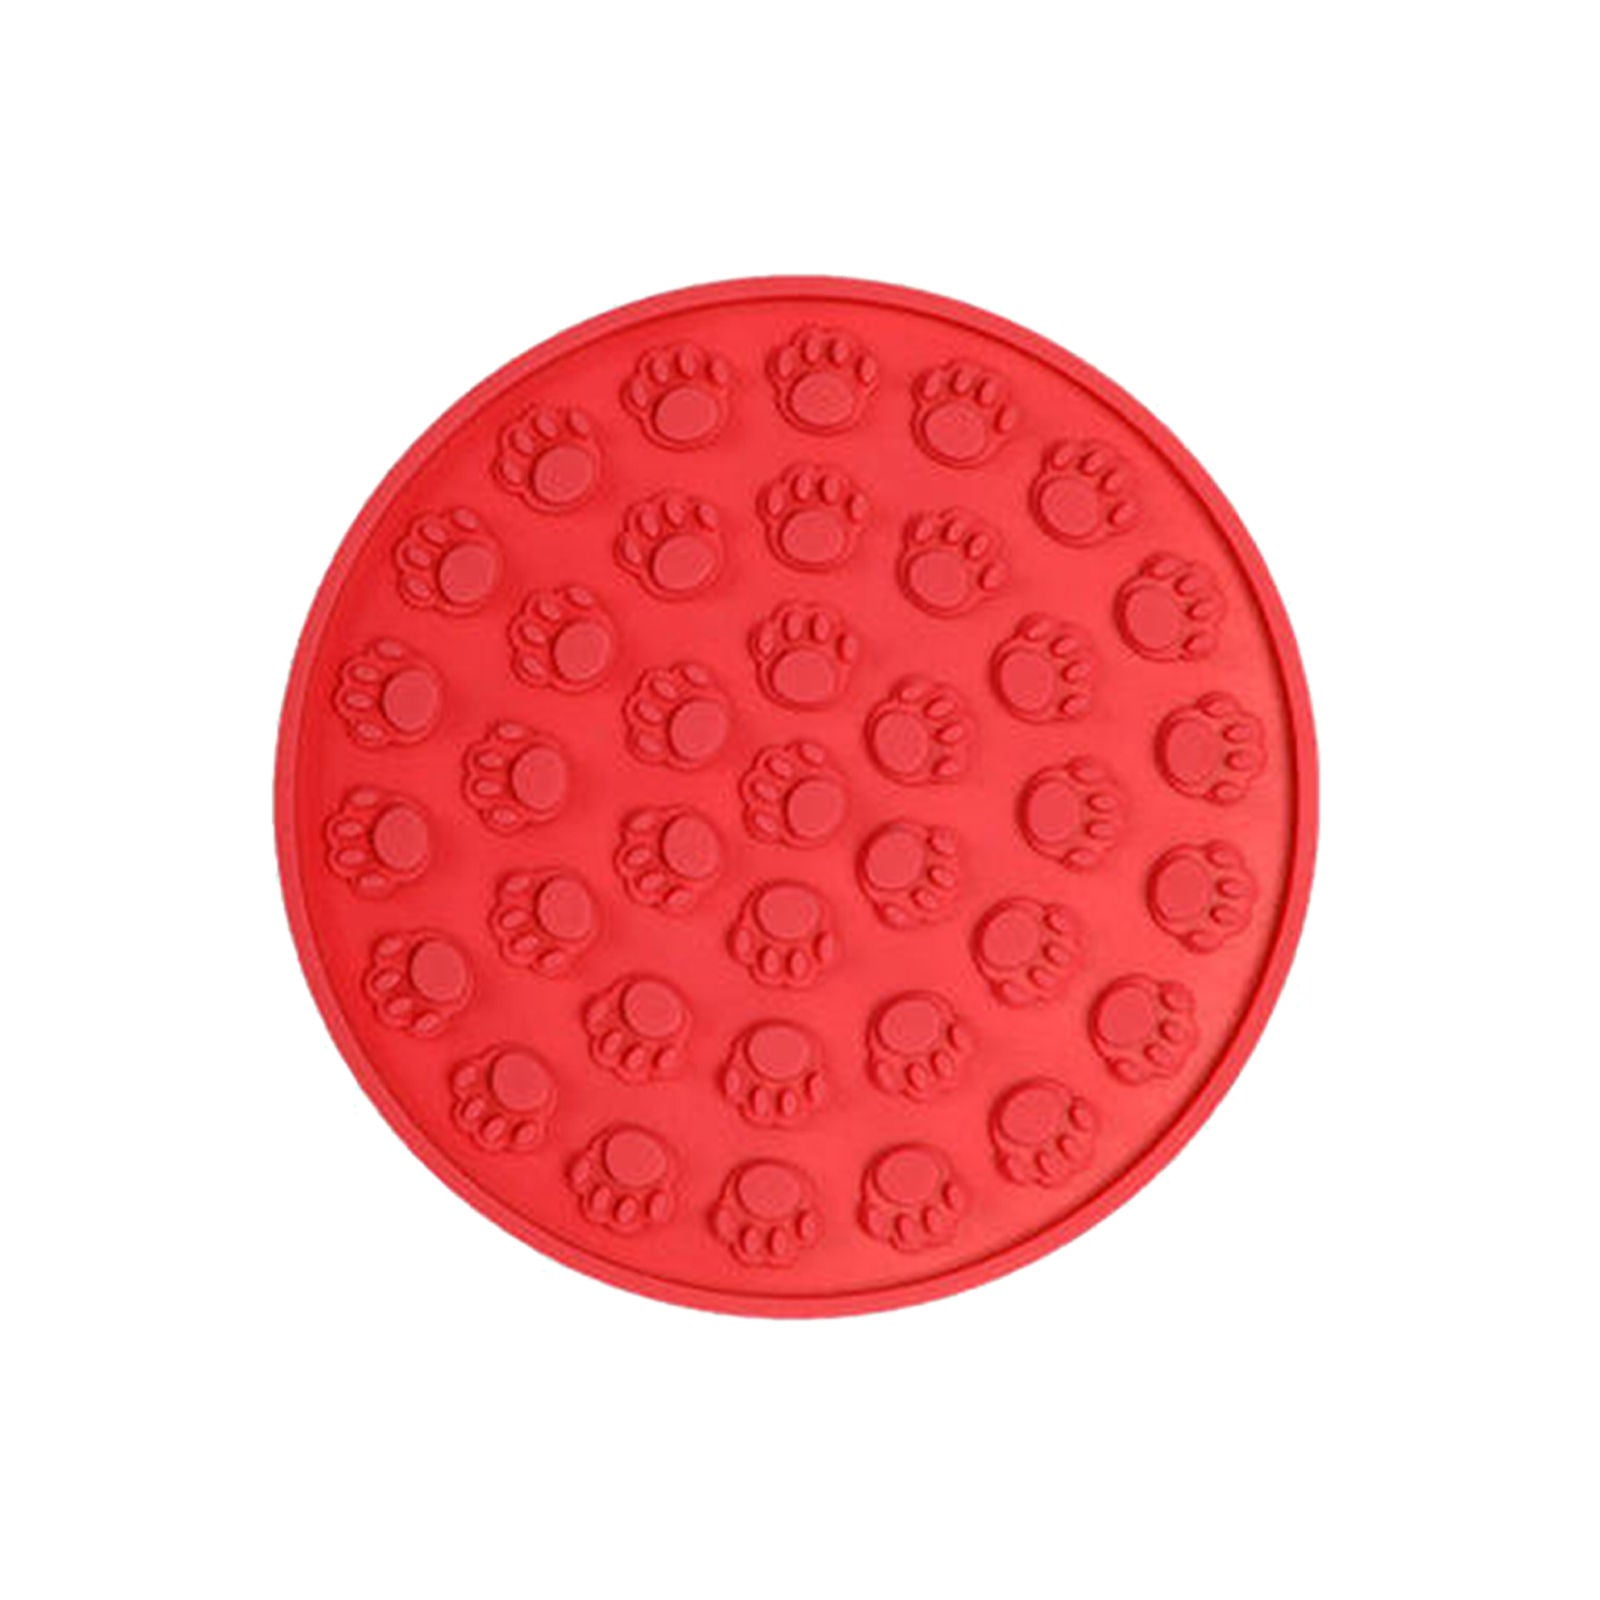 Pawfriends Silicone Dog Cat Pet Licking Pad Anti-Anxiety Slow-Feeding Licking Pad Red